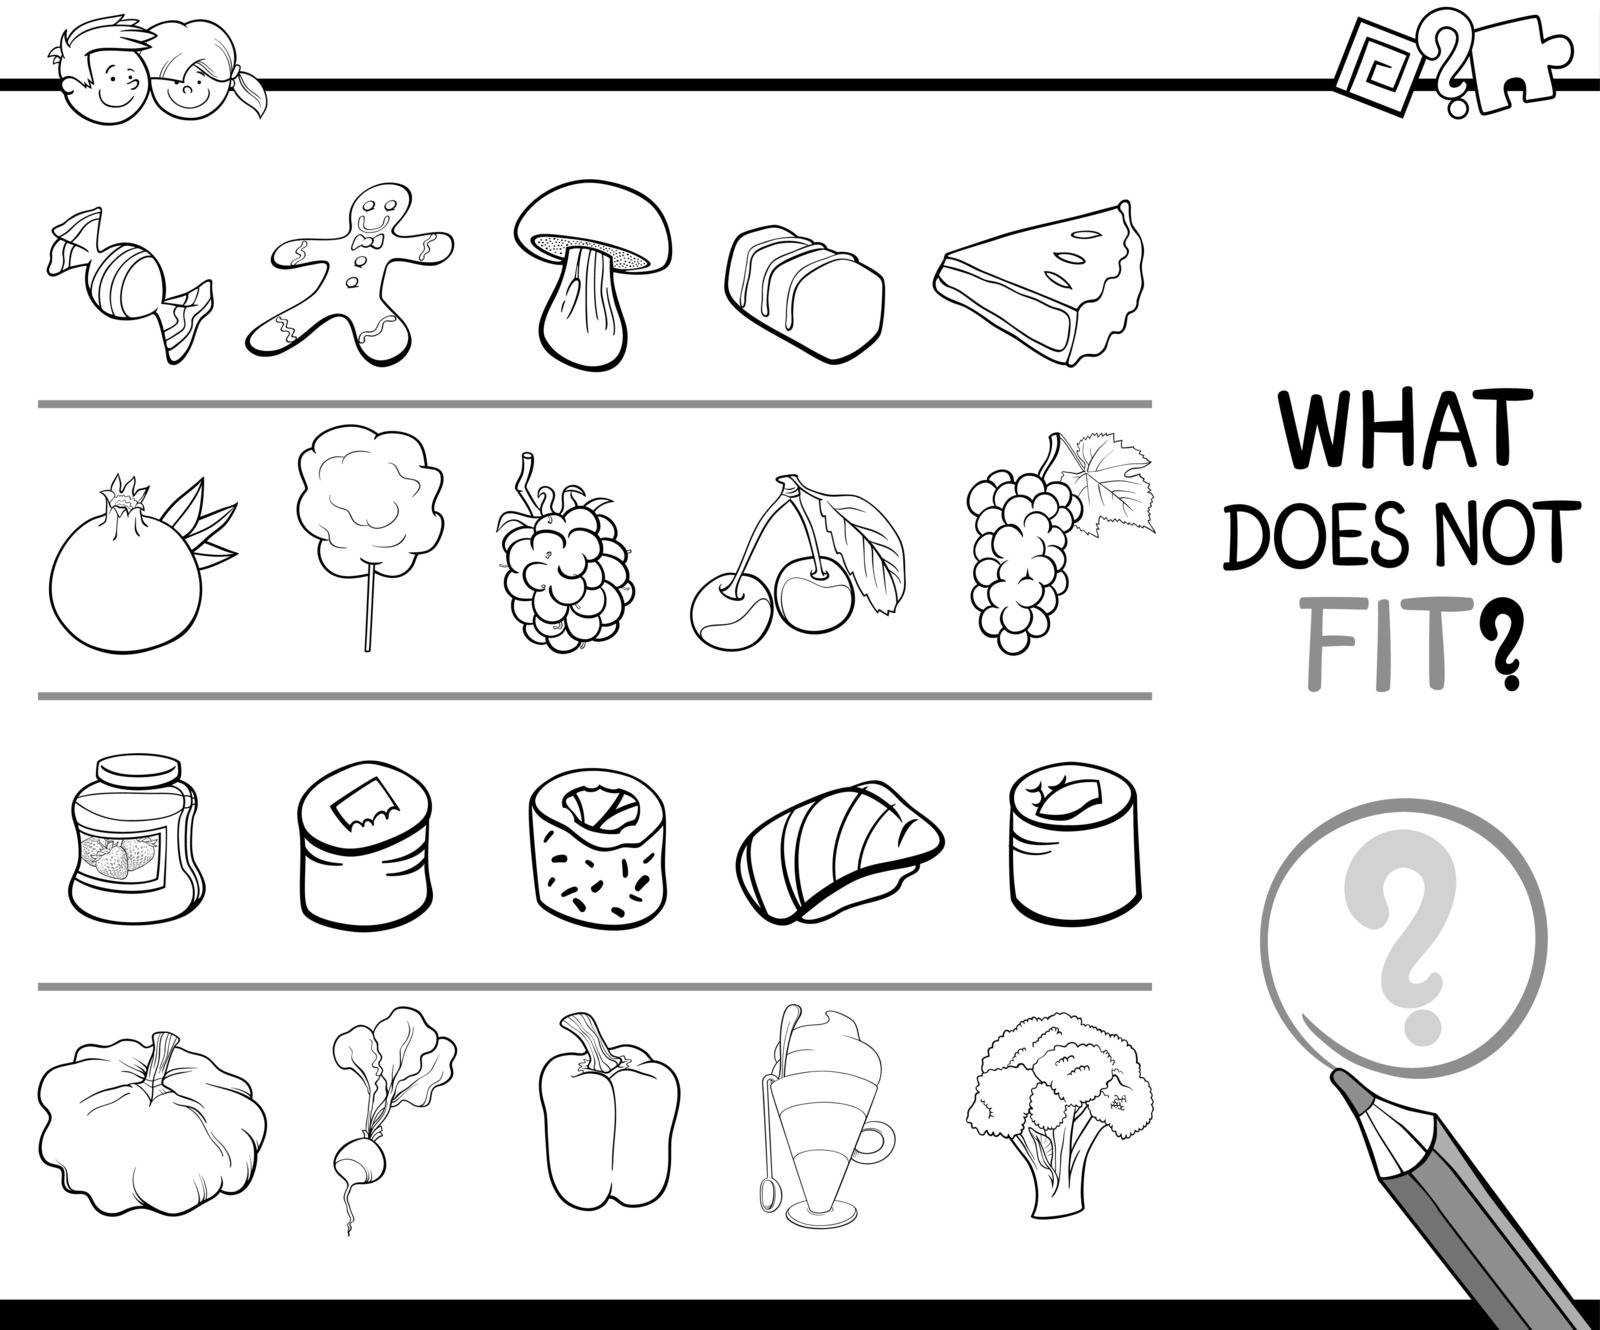 Black and White Cartoon Illustration of Finding Improper Picture in the Row Educational Activity for Children with Food Objects Coloring Page